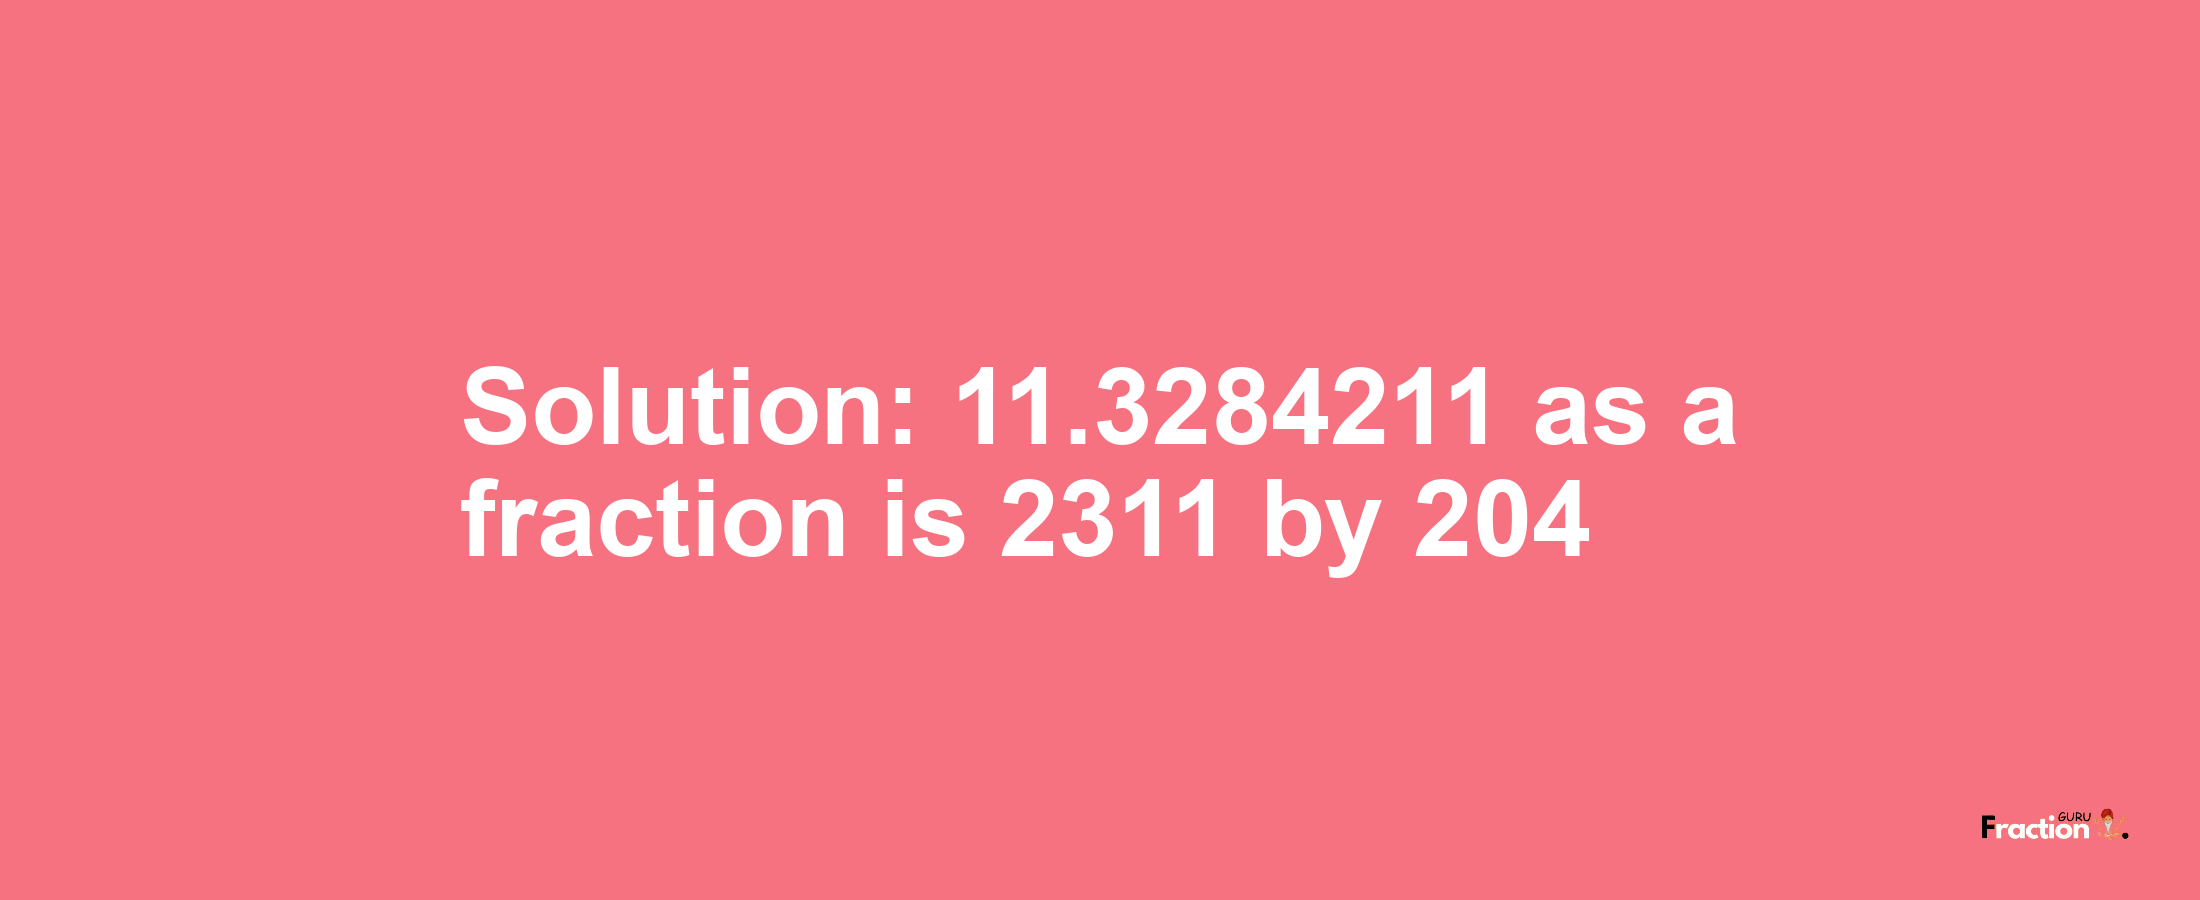 Solution:11.3284211 as a fraction is 2311/204